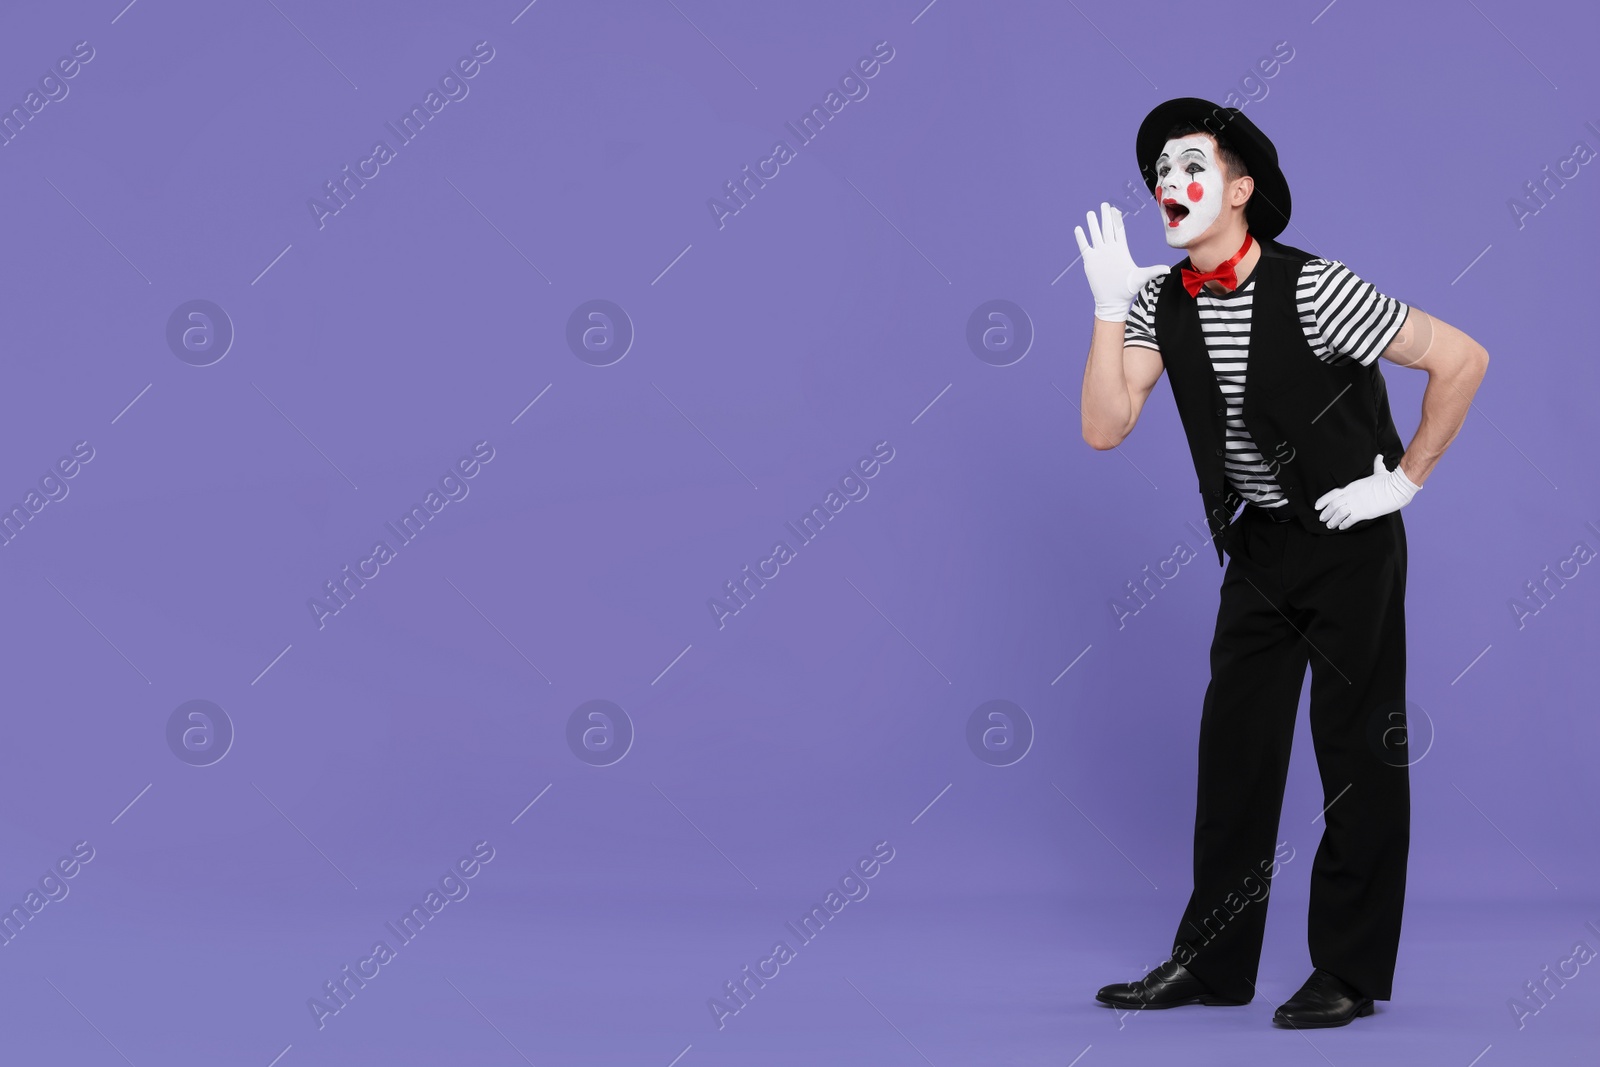 Photo of Funny mime artist in hat screaming on purple background. Space for text